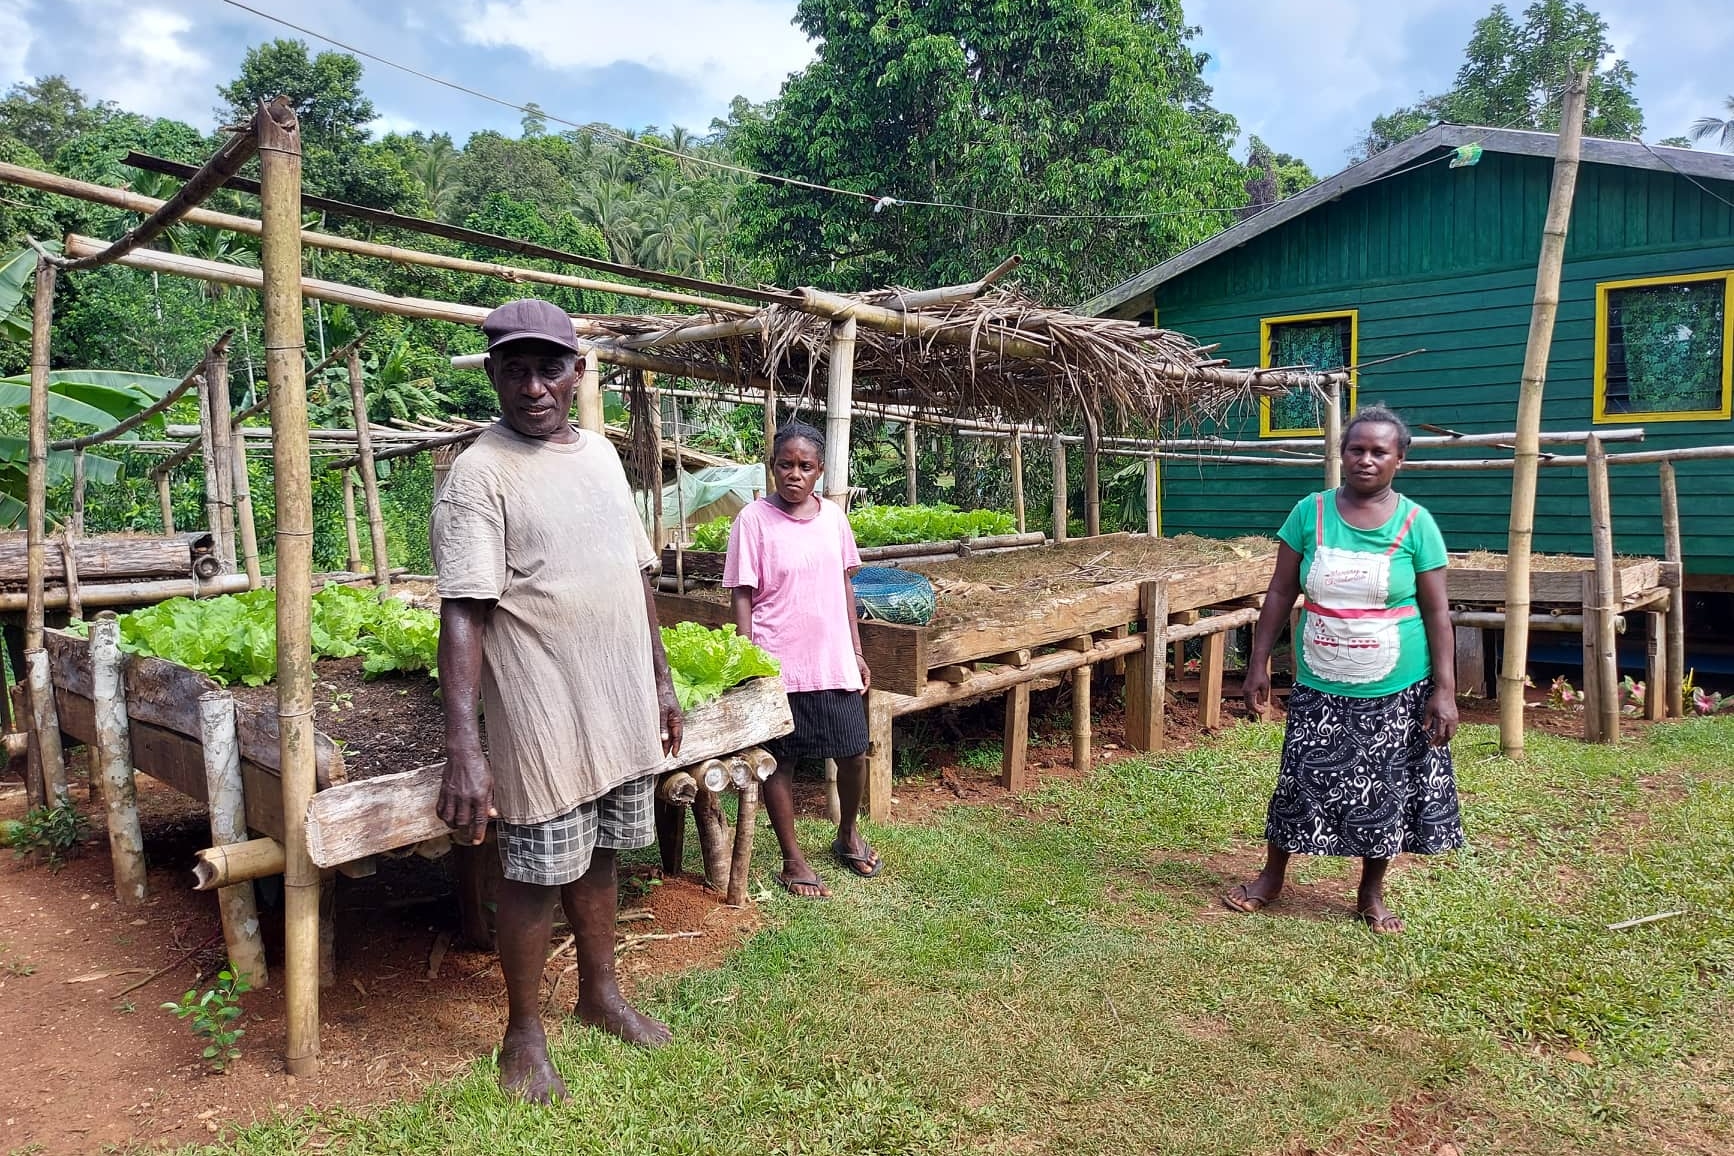 Women's networks building home grown resilience in the Solomon Islands | United Nations Development Programme